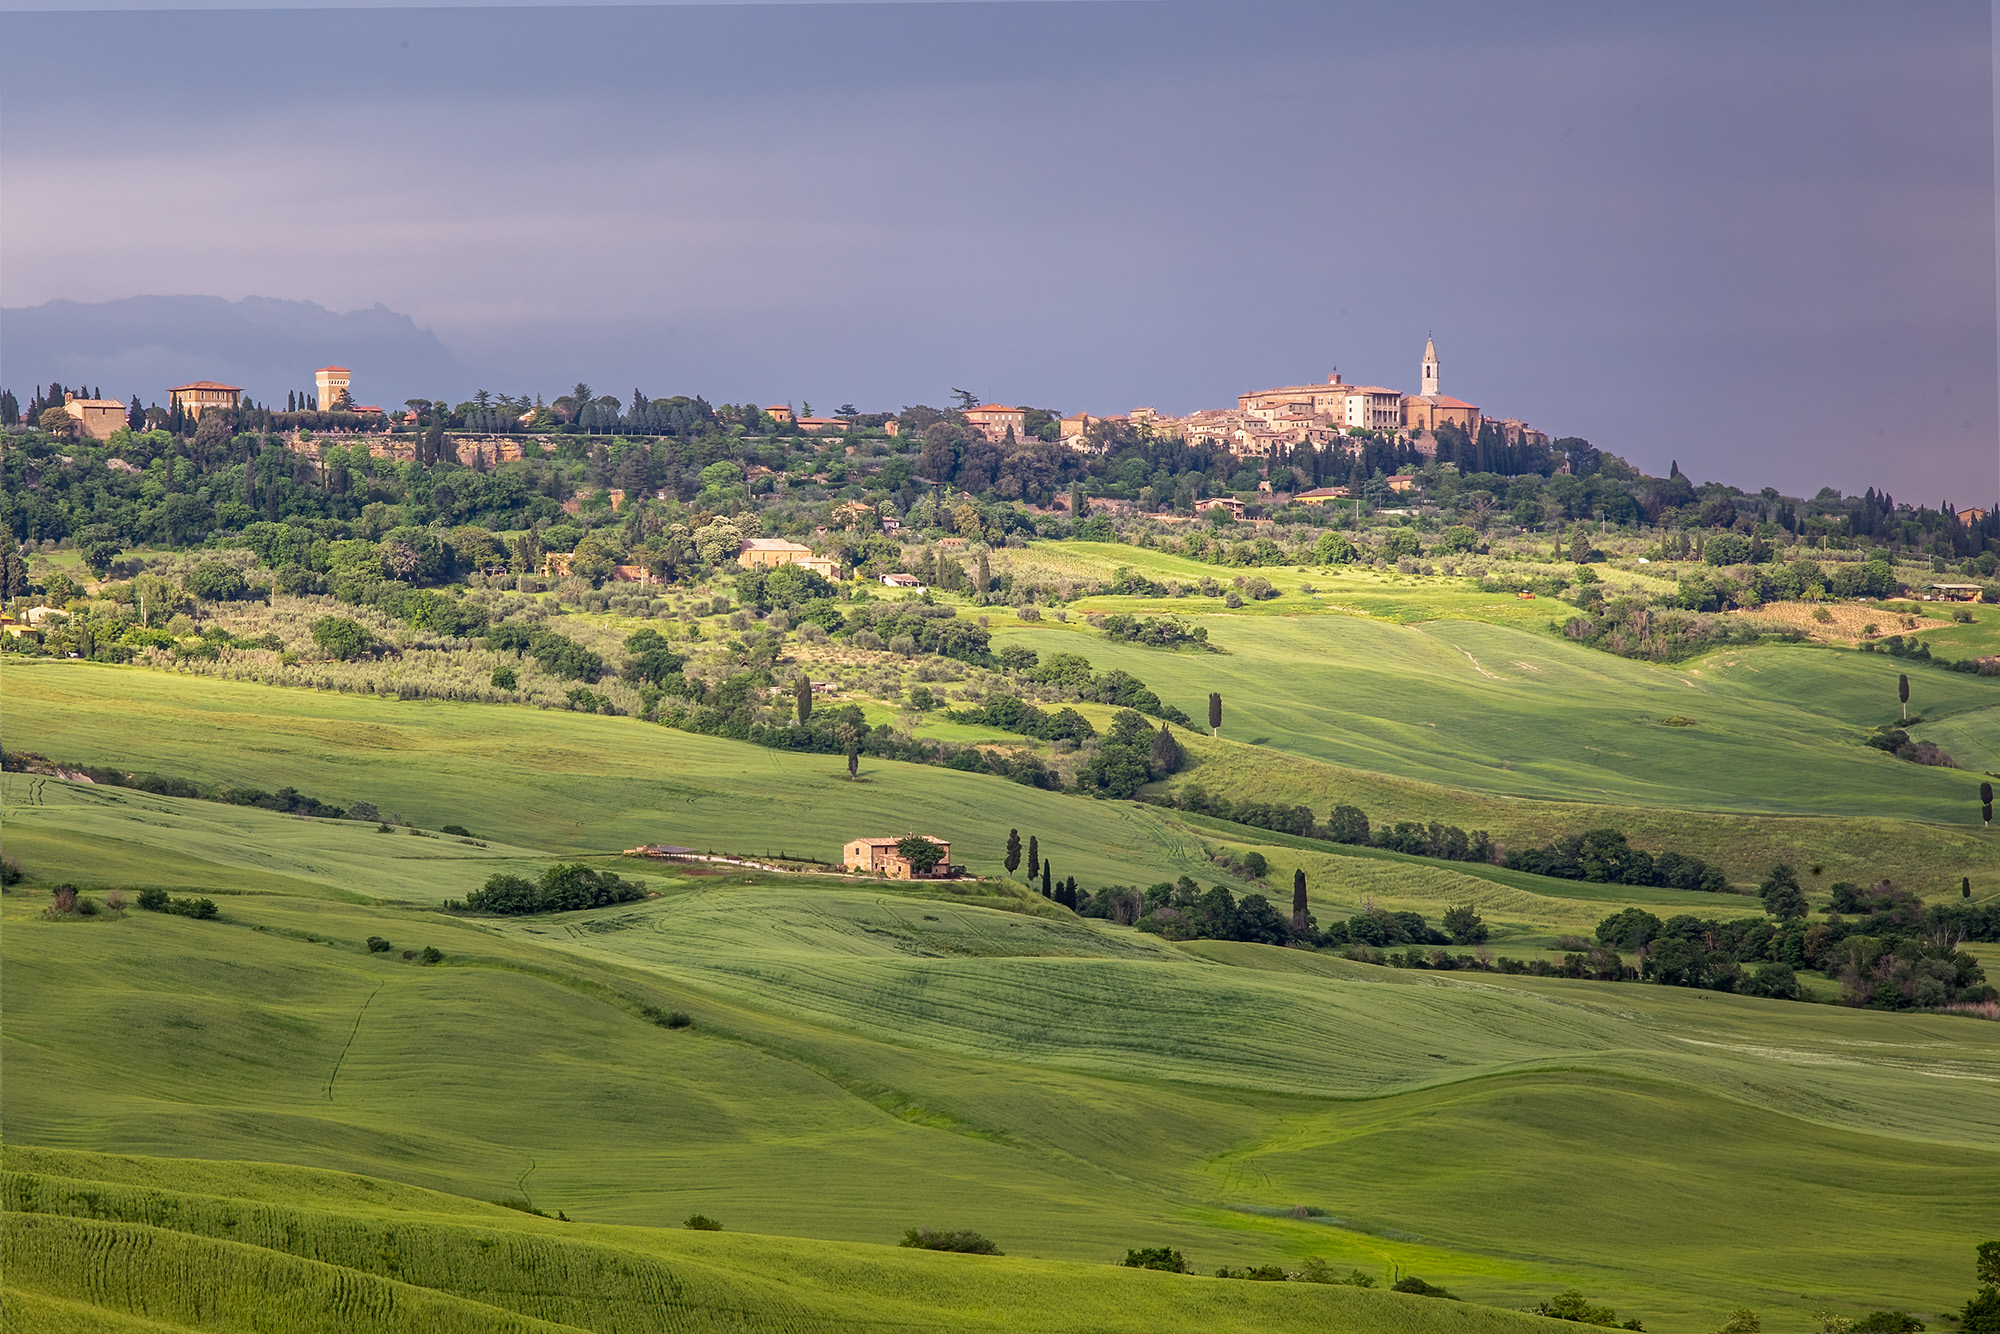 In this image, the drama of a Tuscan thunderstorm unfolds. Vast grasslands stretch towards the distant town of Pienza, bathed...